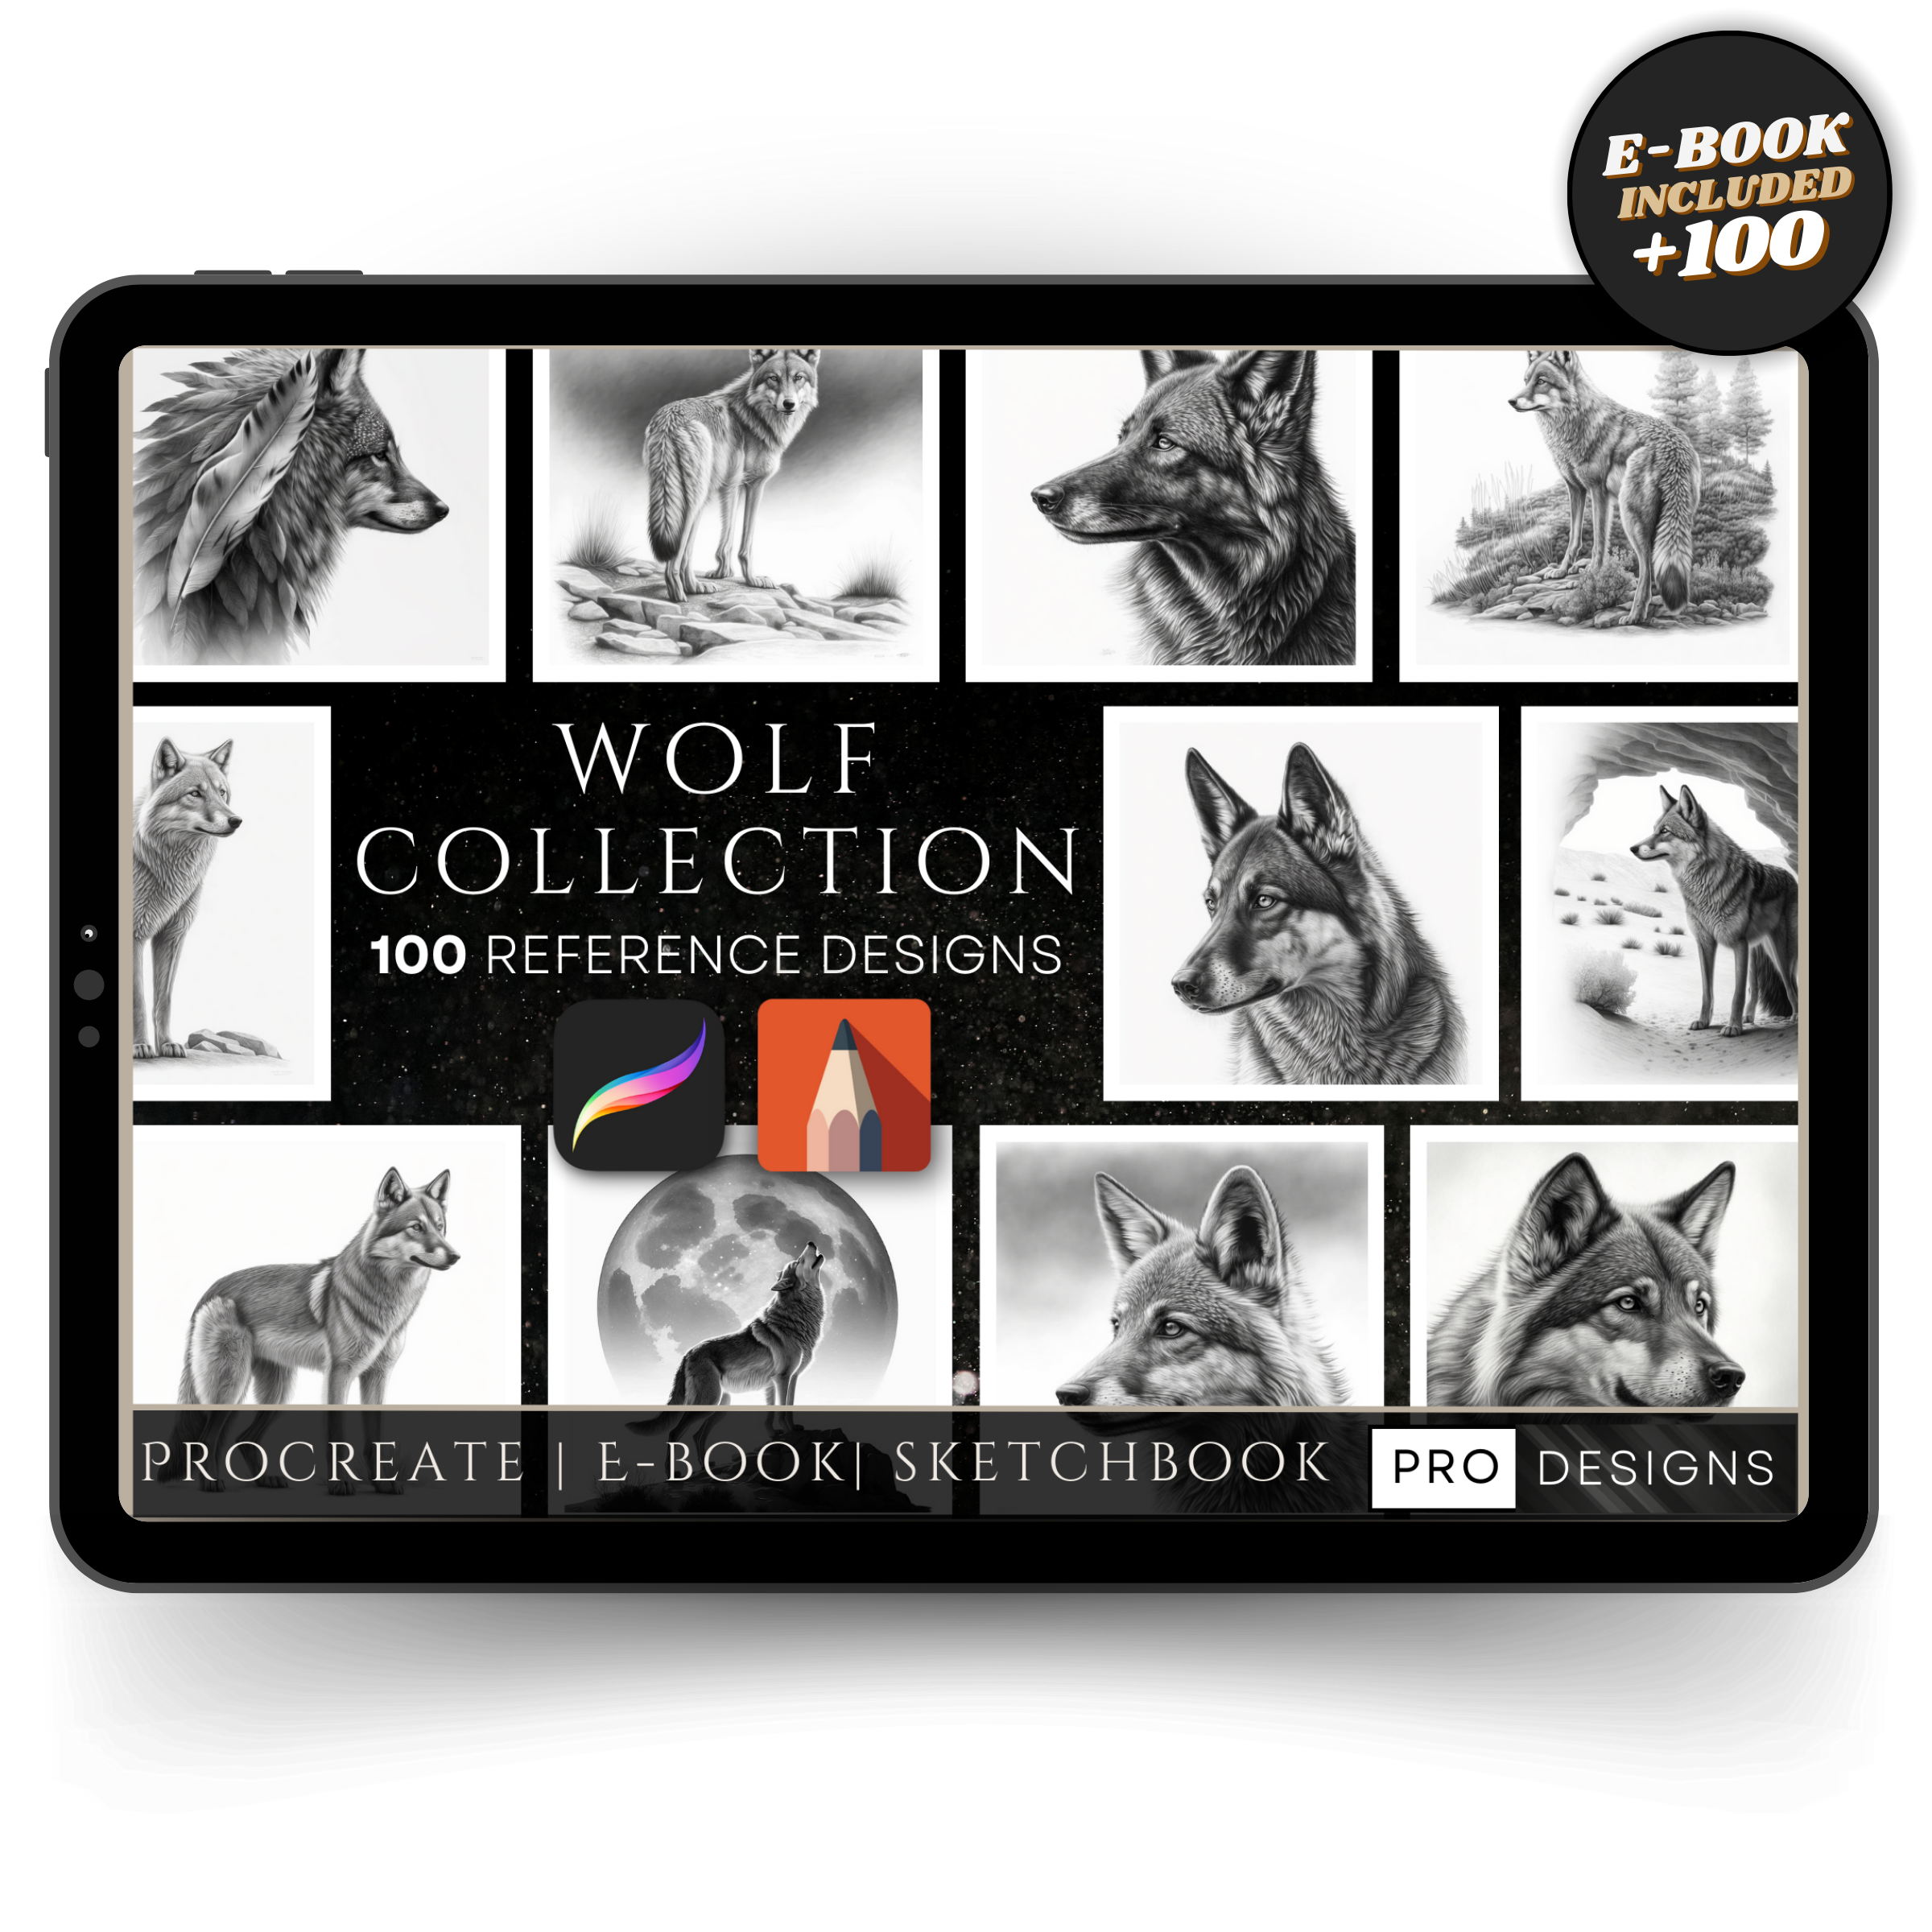 "Call of the Wild" - The Wolf Collection